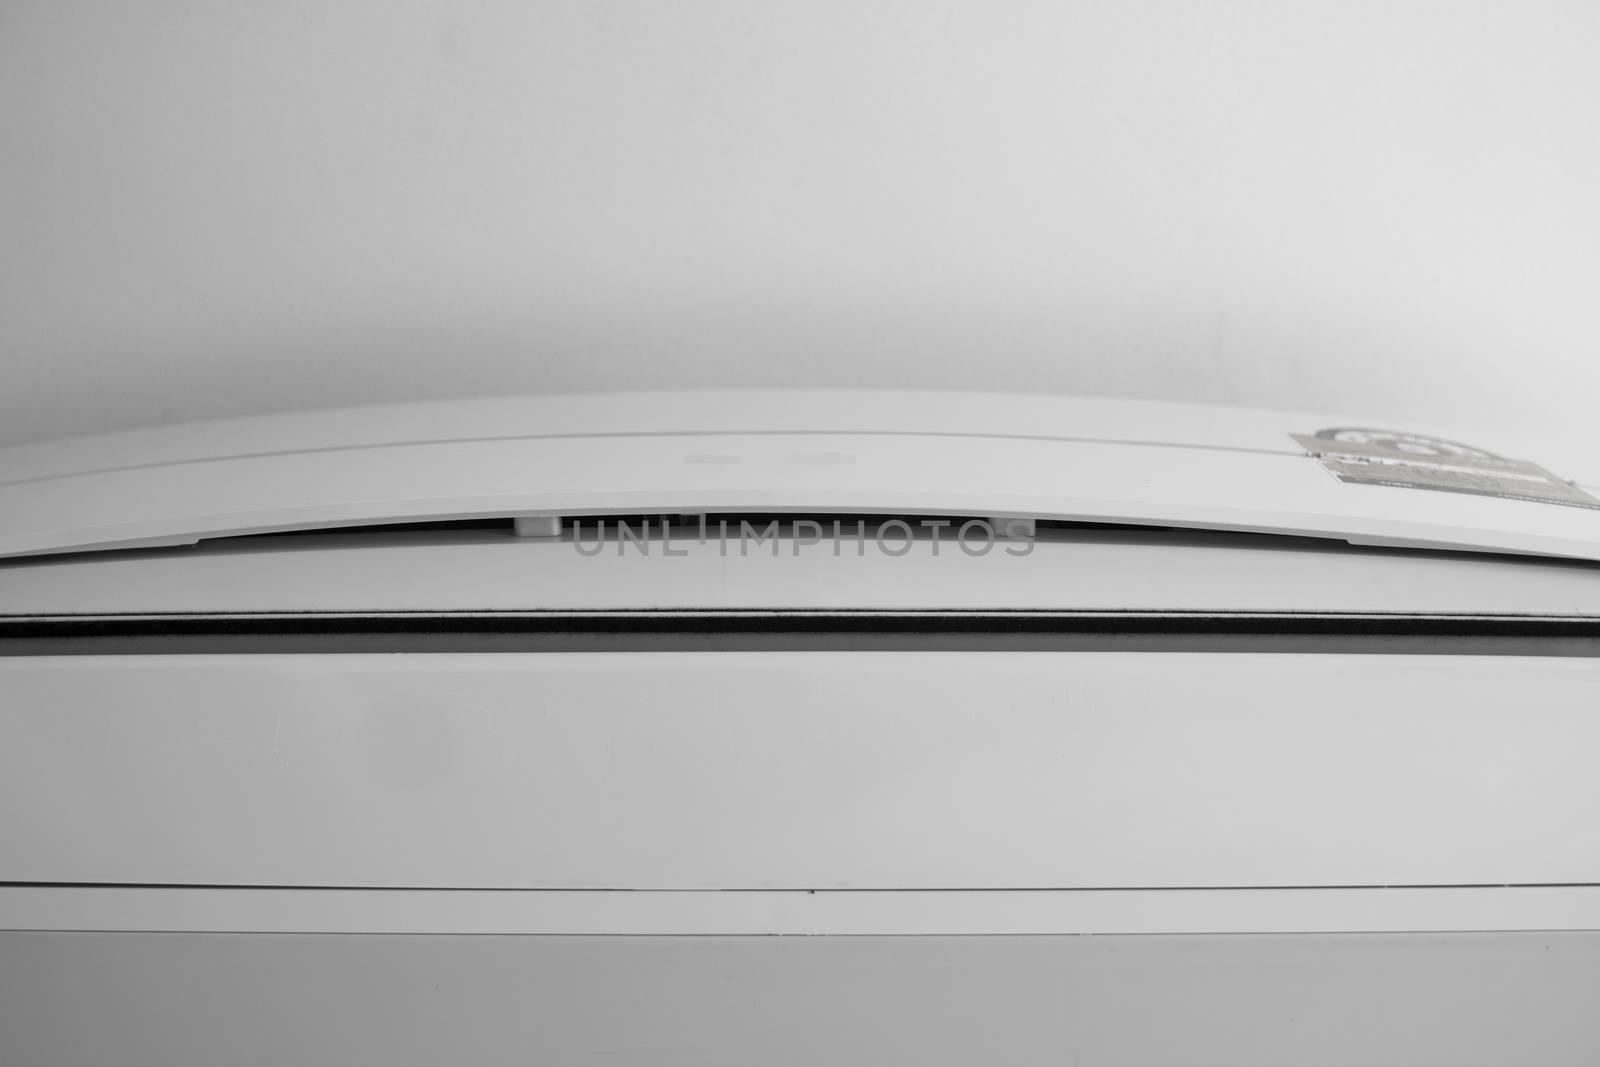 Air conditioner mounted on a white wall in the living room or bedroom. Indooor comfort temperature. Health concepts and energy savings. by vovsht